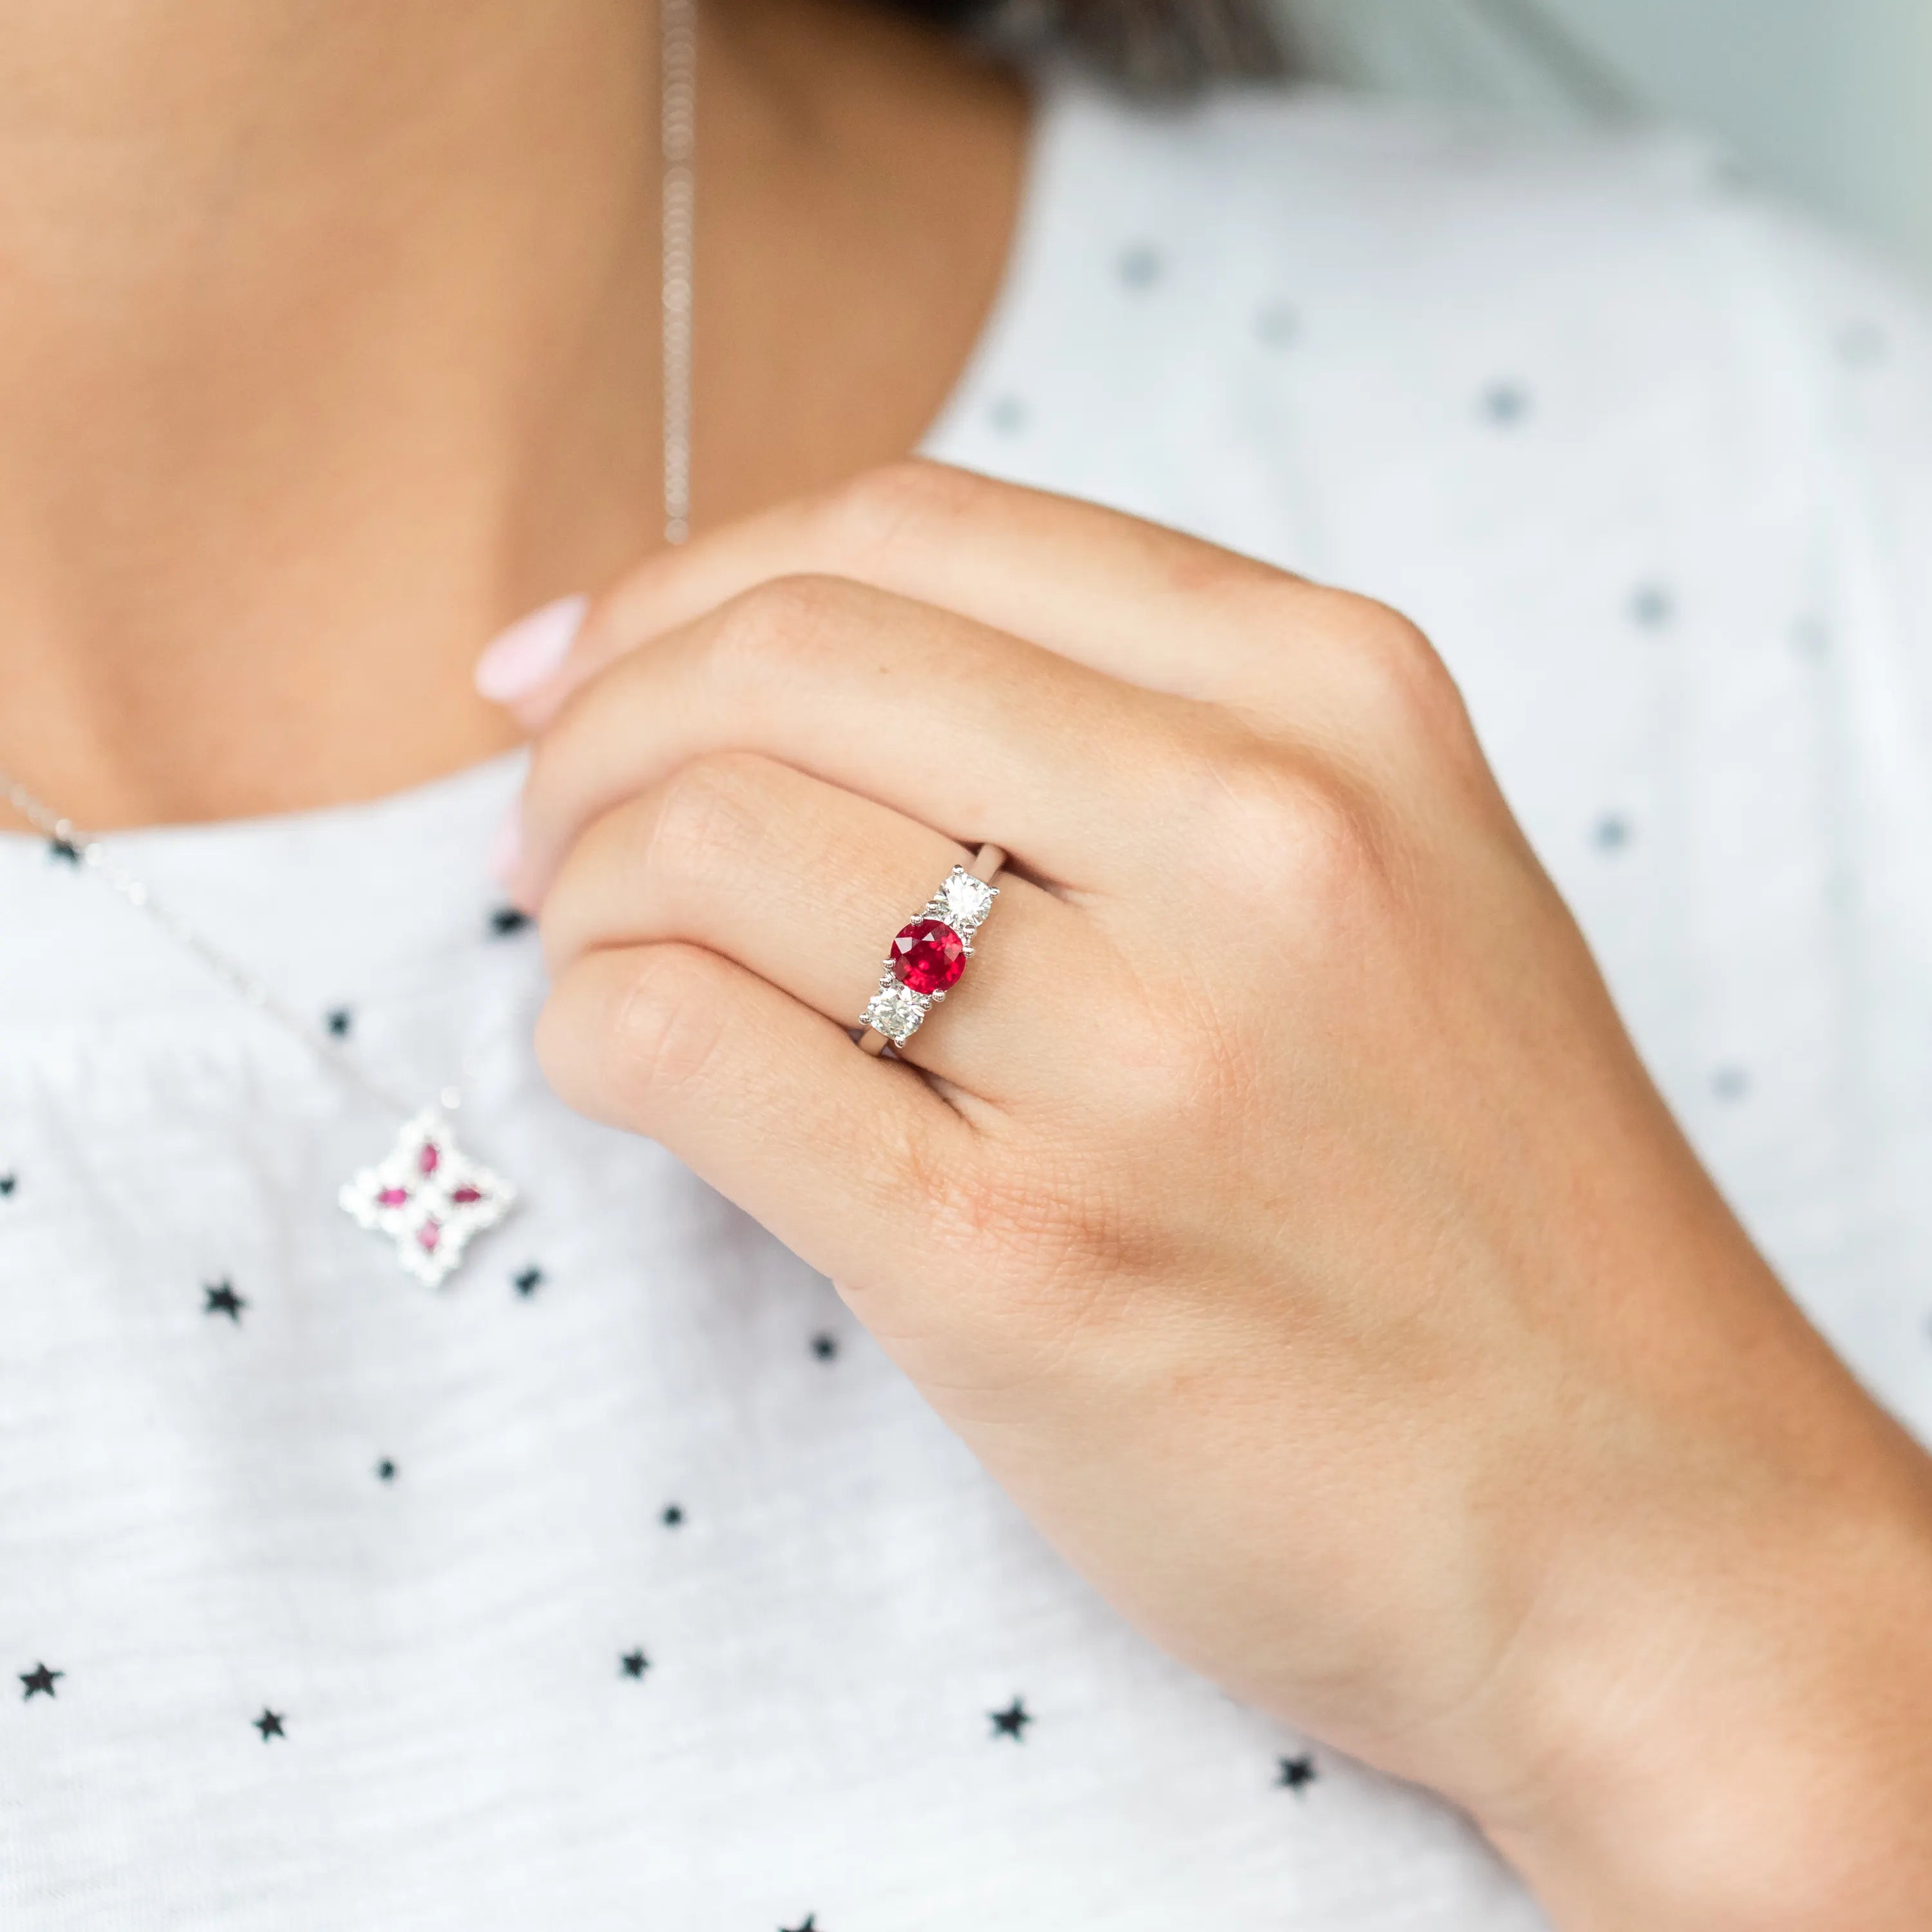 The Story Behind July's Birthstone: The Ruby